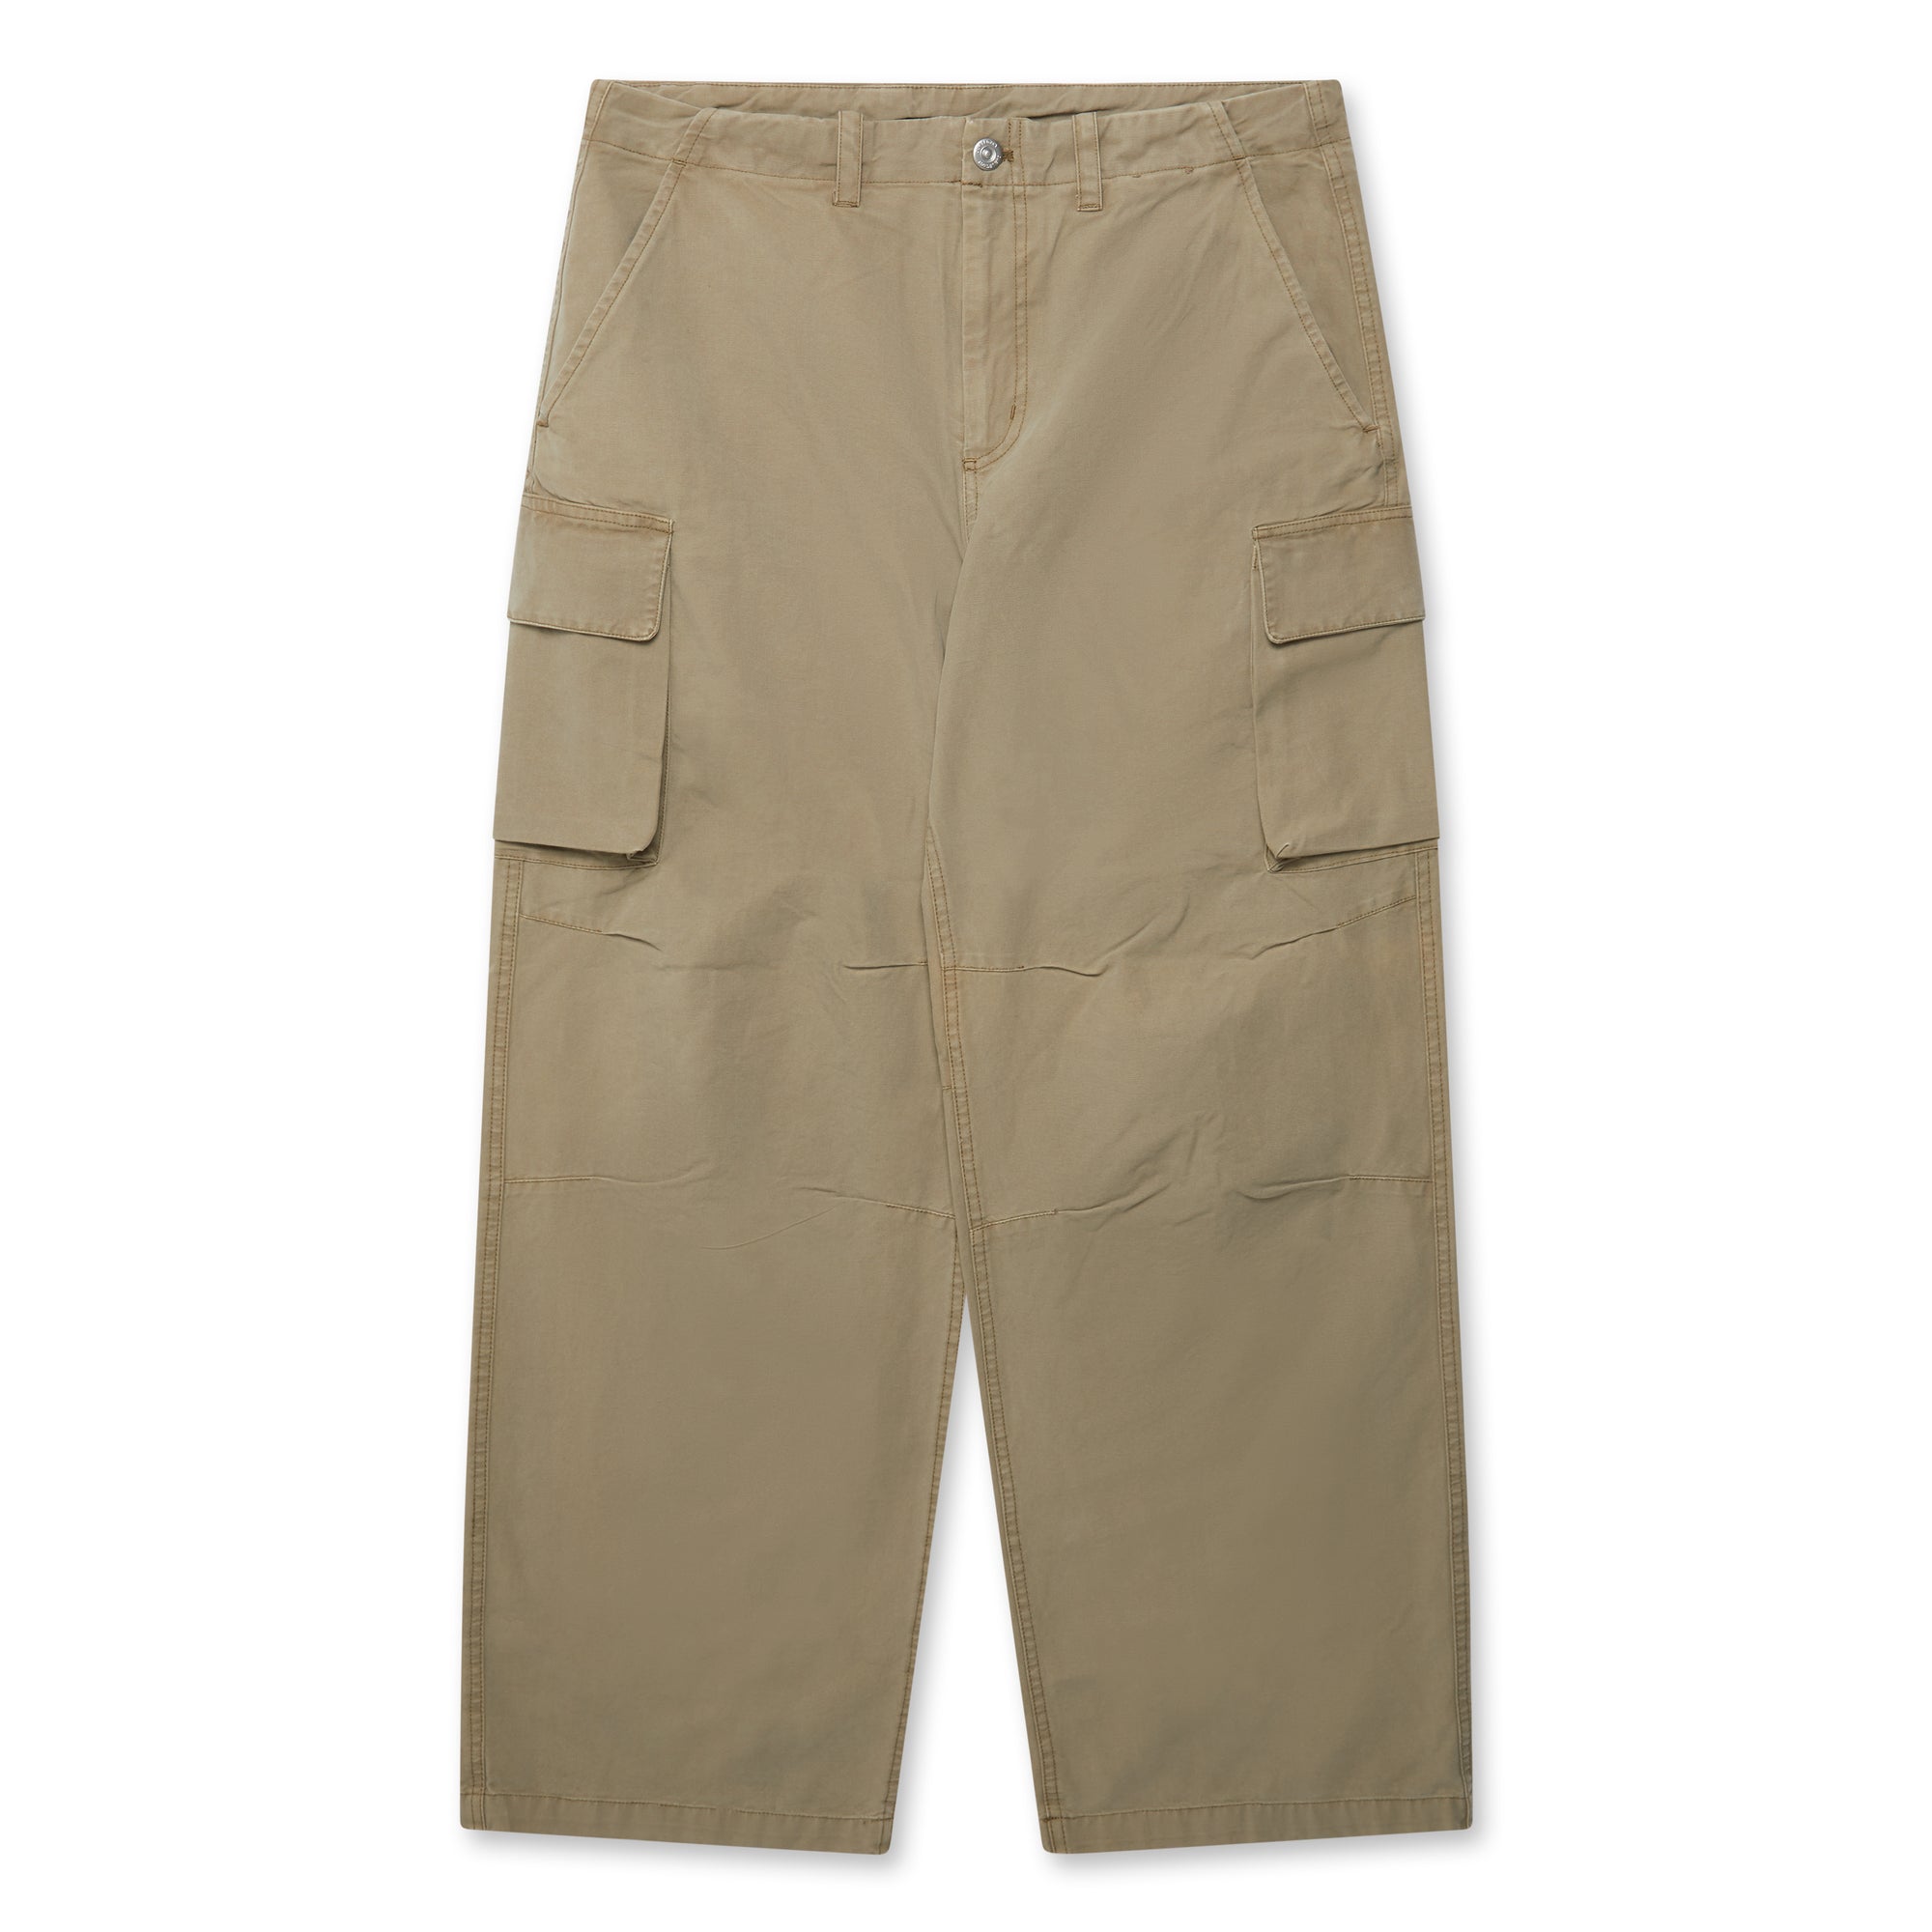 Our Legacy - Men’s Mount Cargo - (Beige) view 4